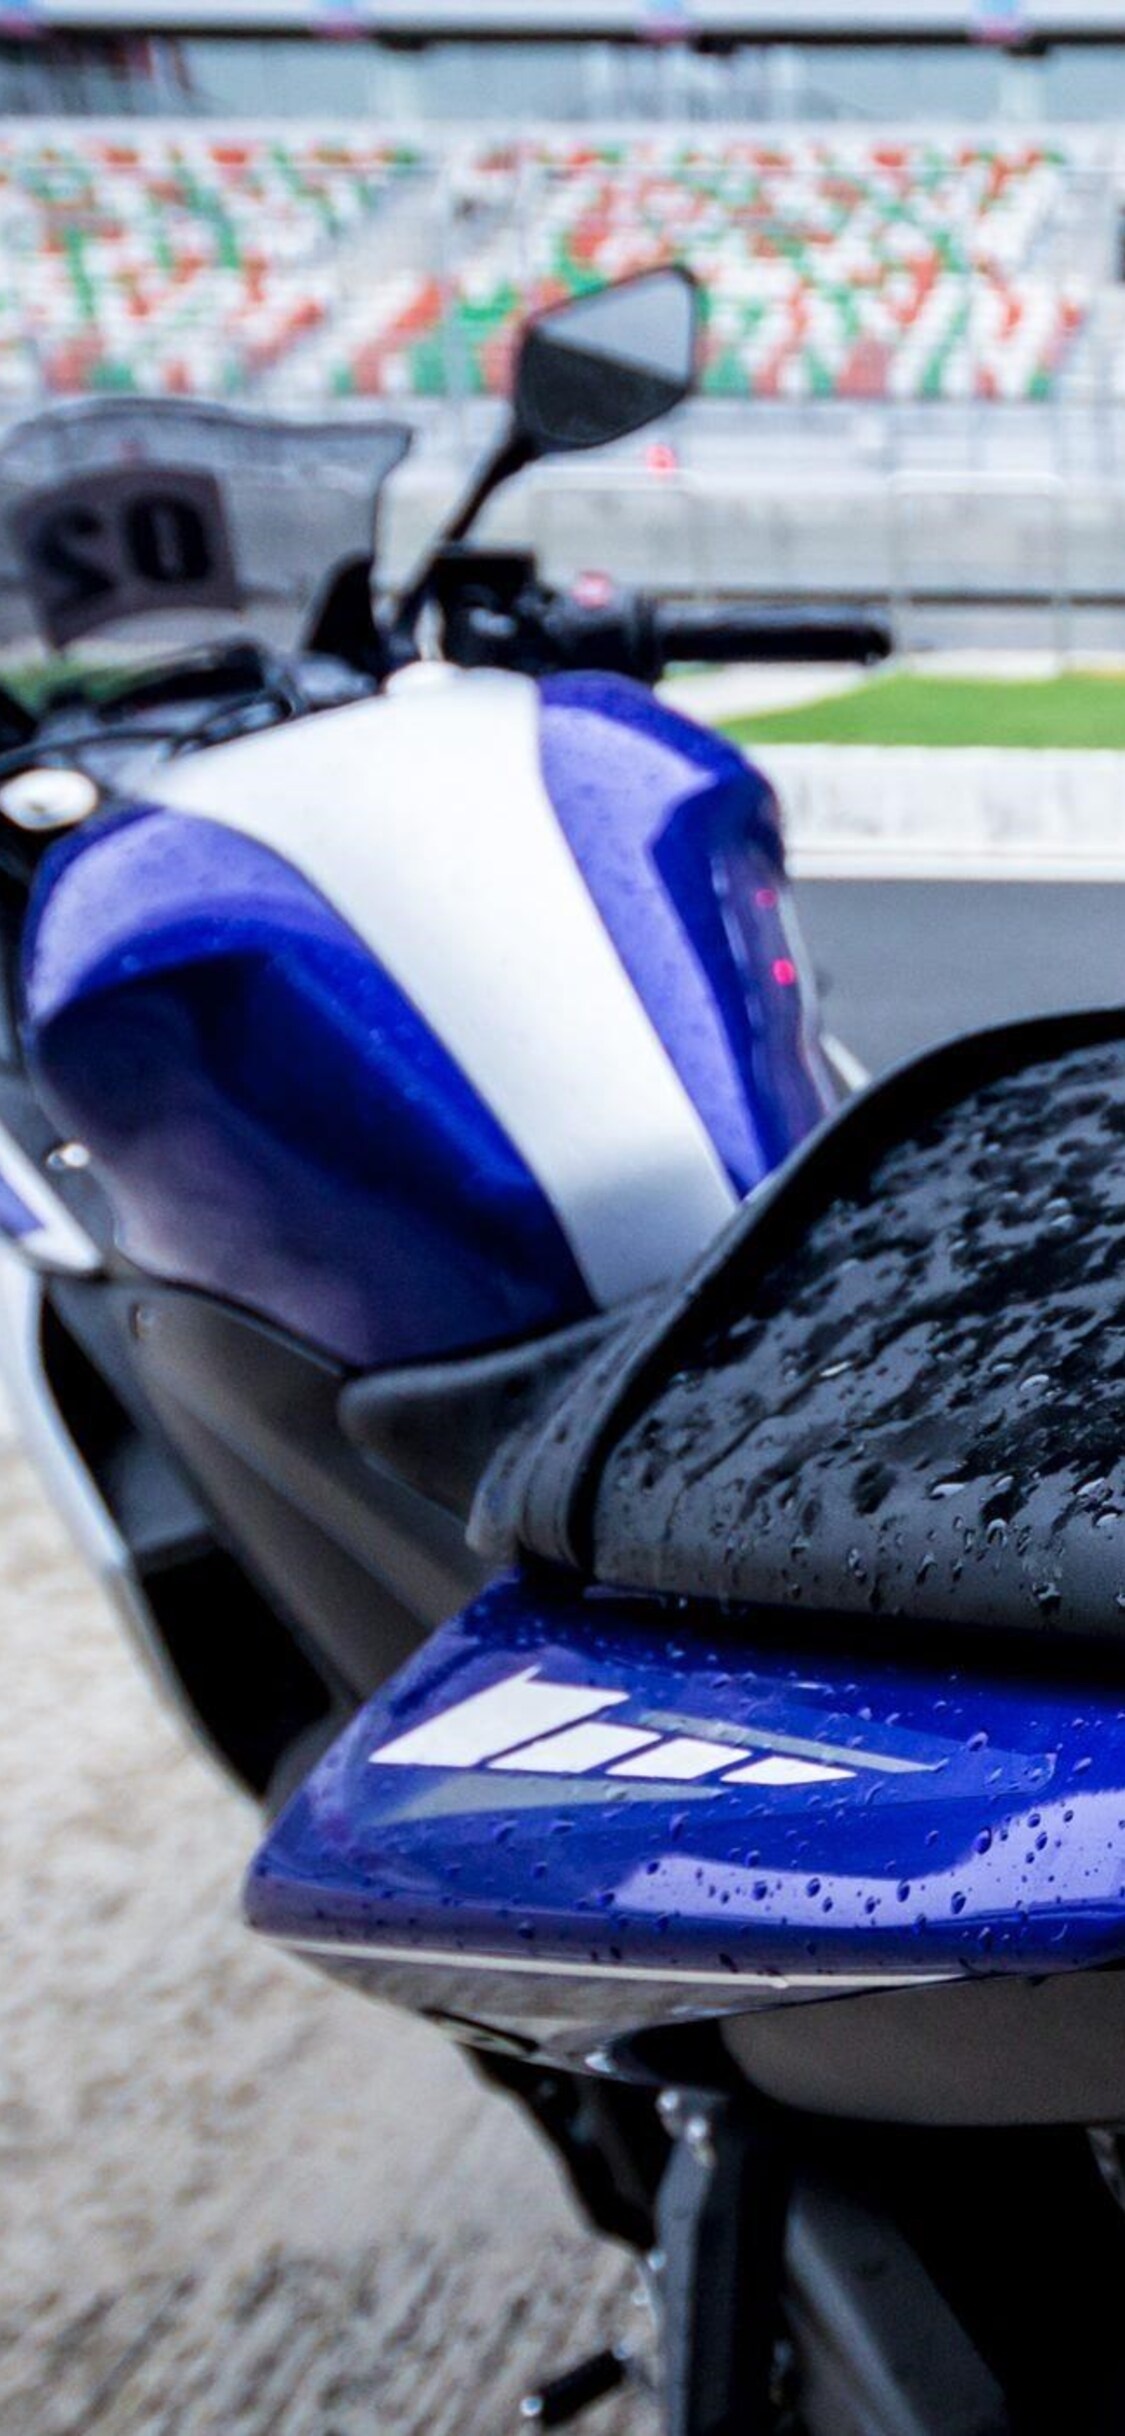 Yamaha YZF-R3, Tail light design, iPhone XS wallpapers, HD 4k images, 1130x2440 HD Handy